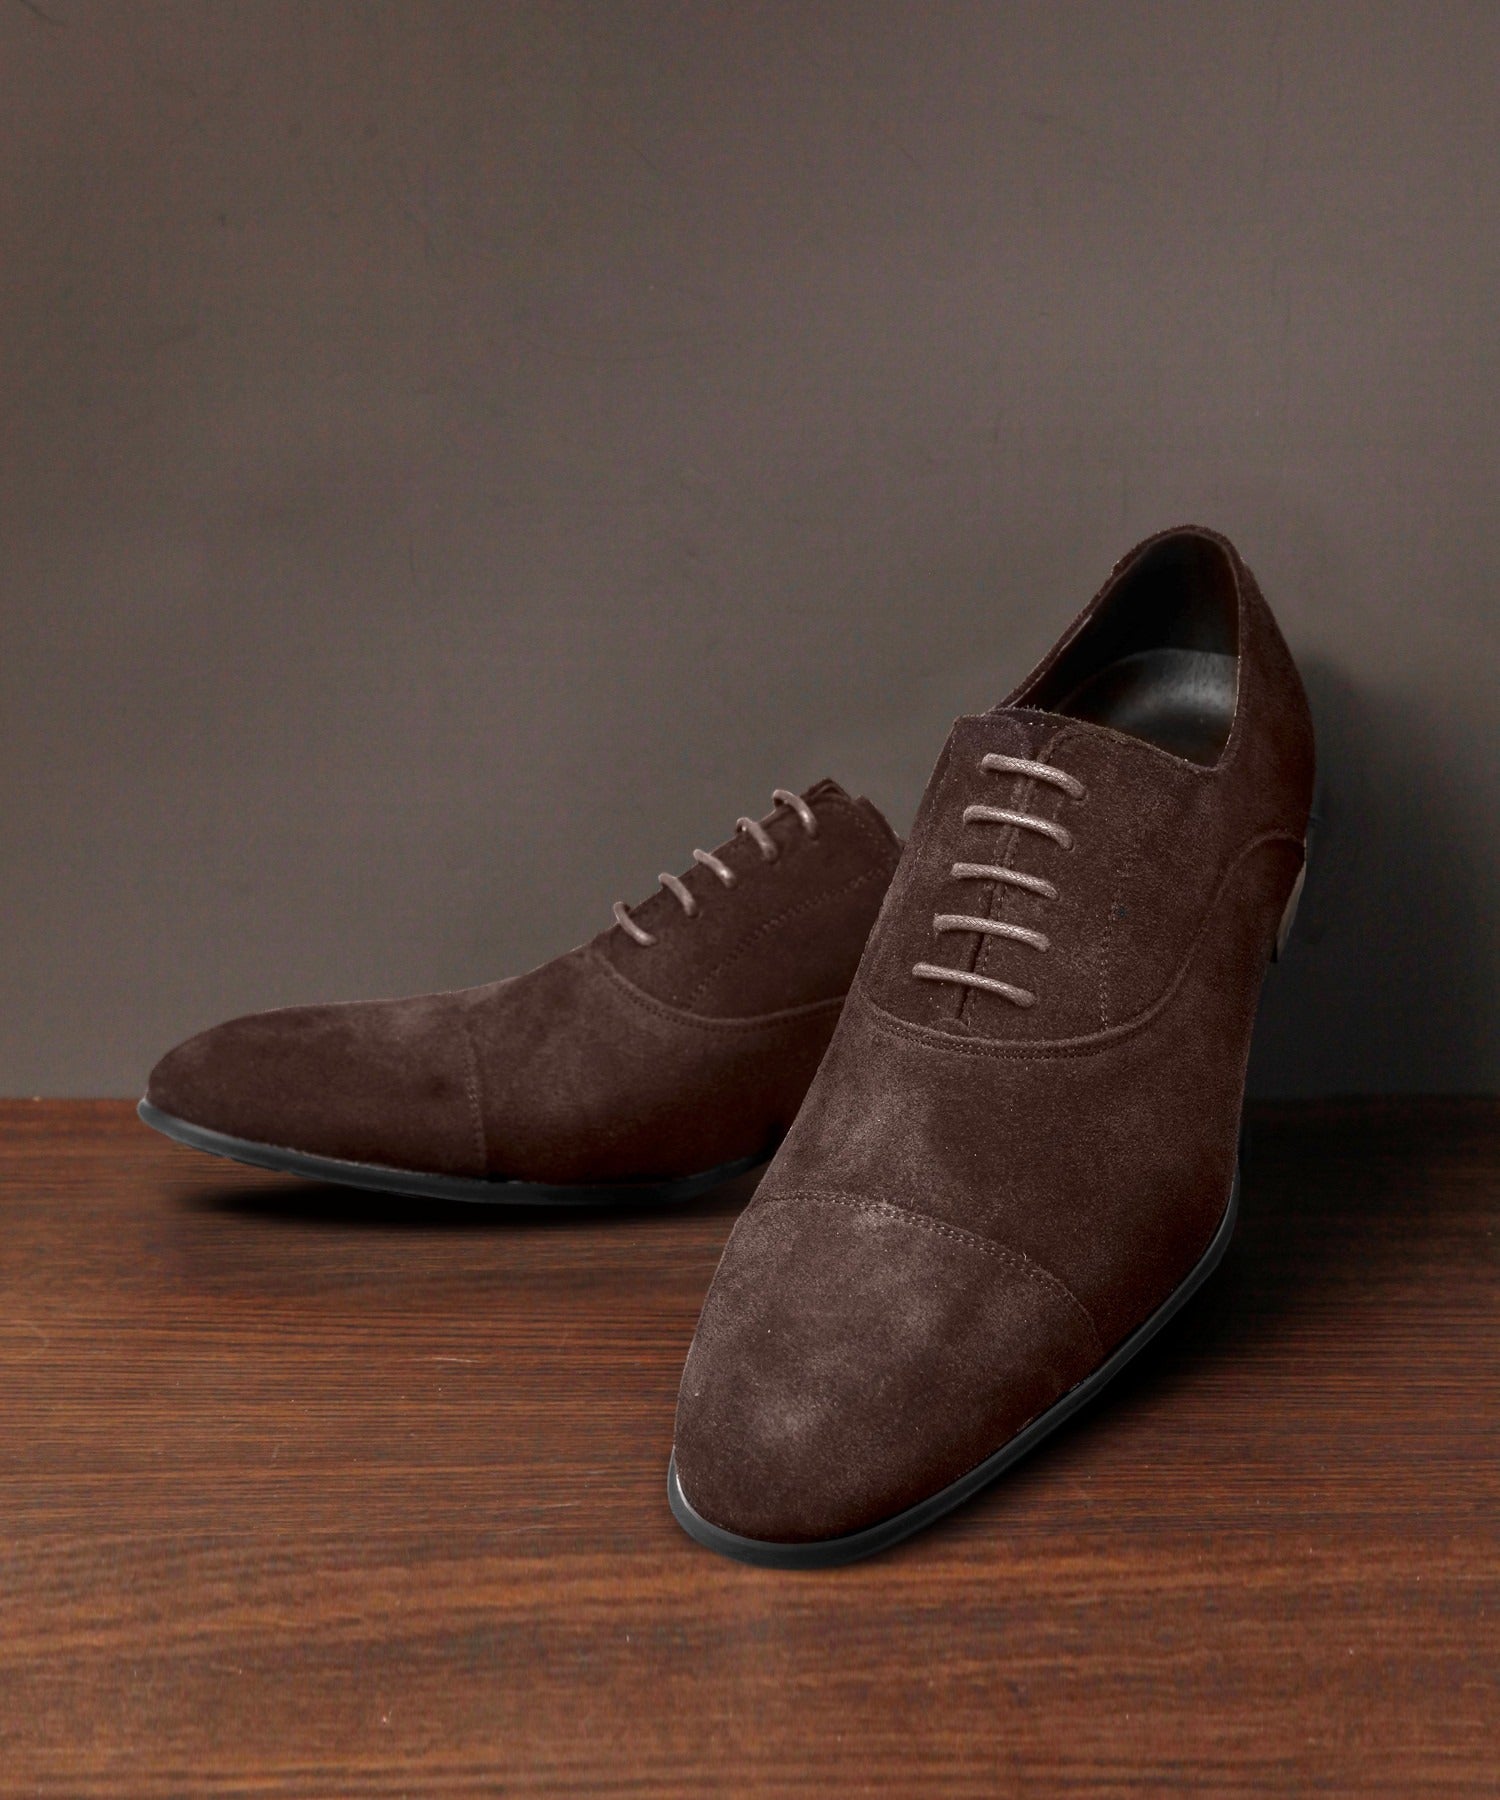 GUIONNET】BUSINESS SHOES STRAIGHT TIP BS201 ビジネスシューズ 